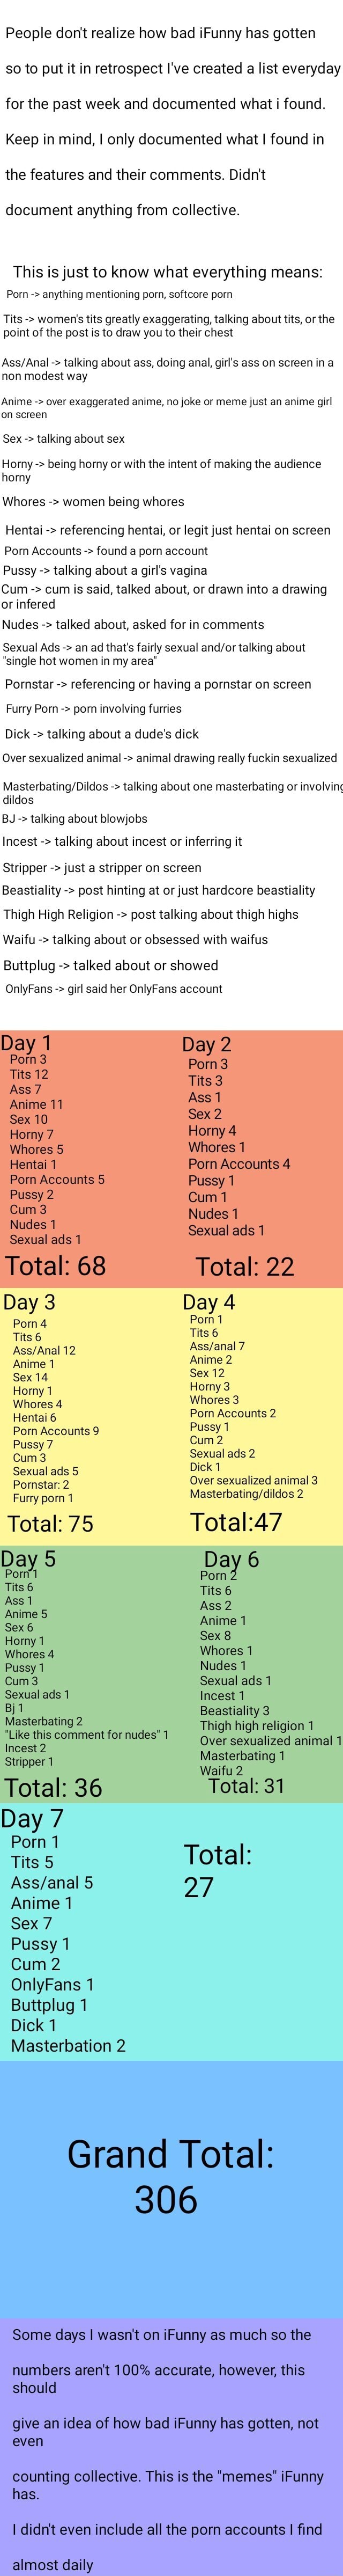 Anime Tits Meme - People don't realize how bad iFunny has gotten so to put it in retrospect  I've created a list everyday for the past week and documented what i found.  Keep in mind, I